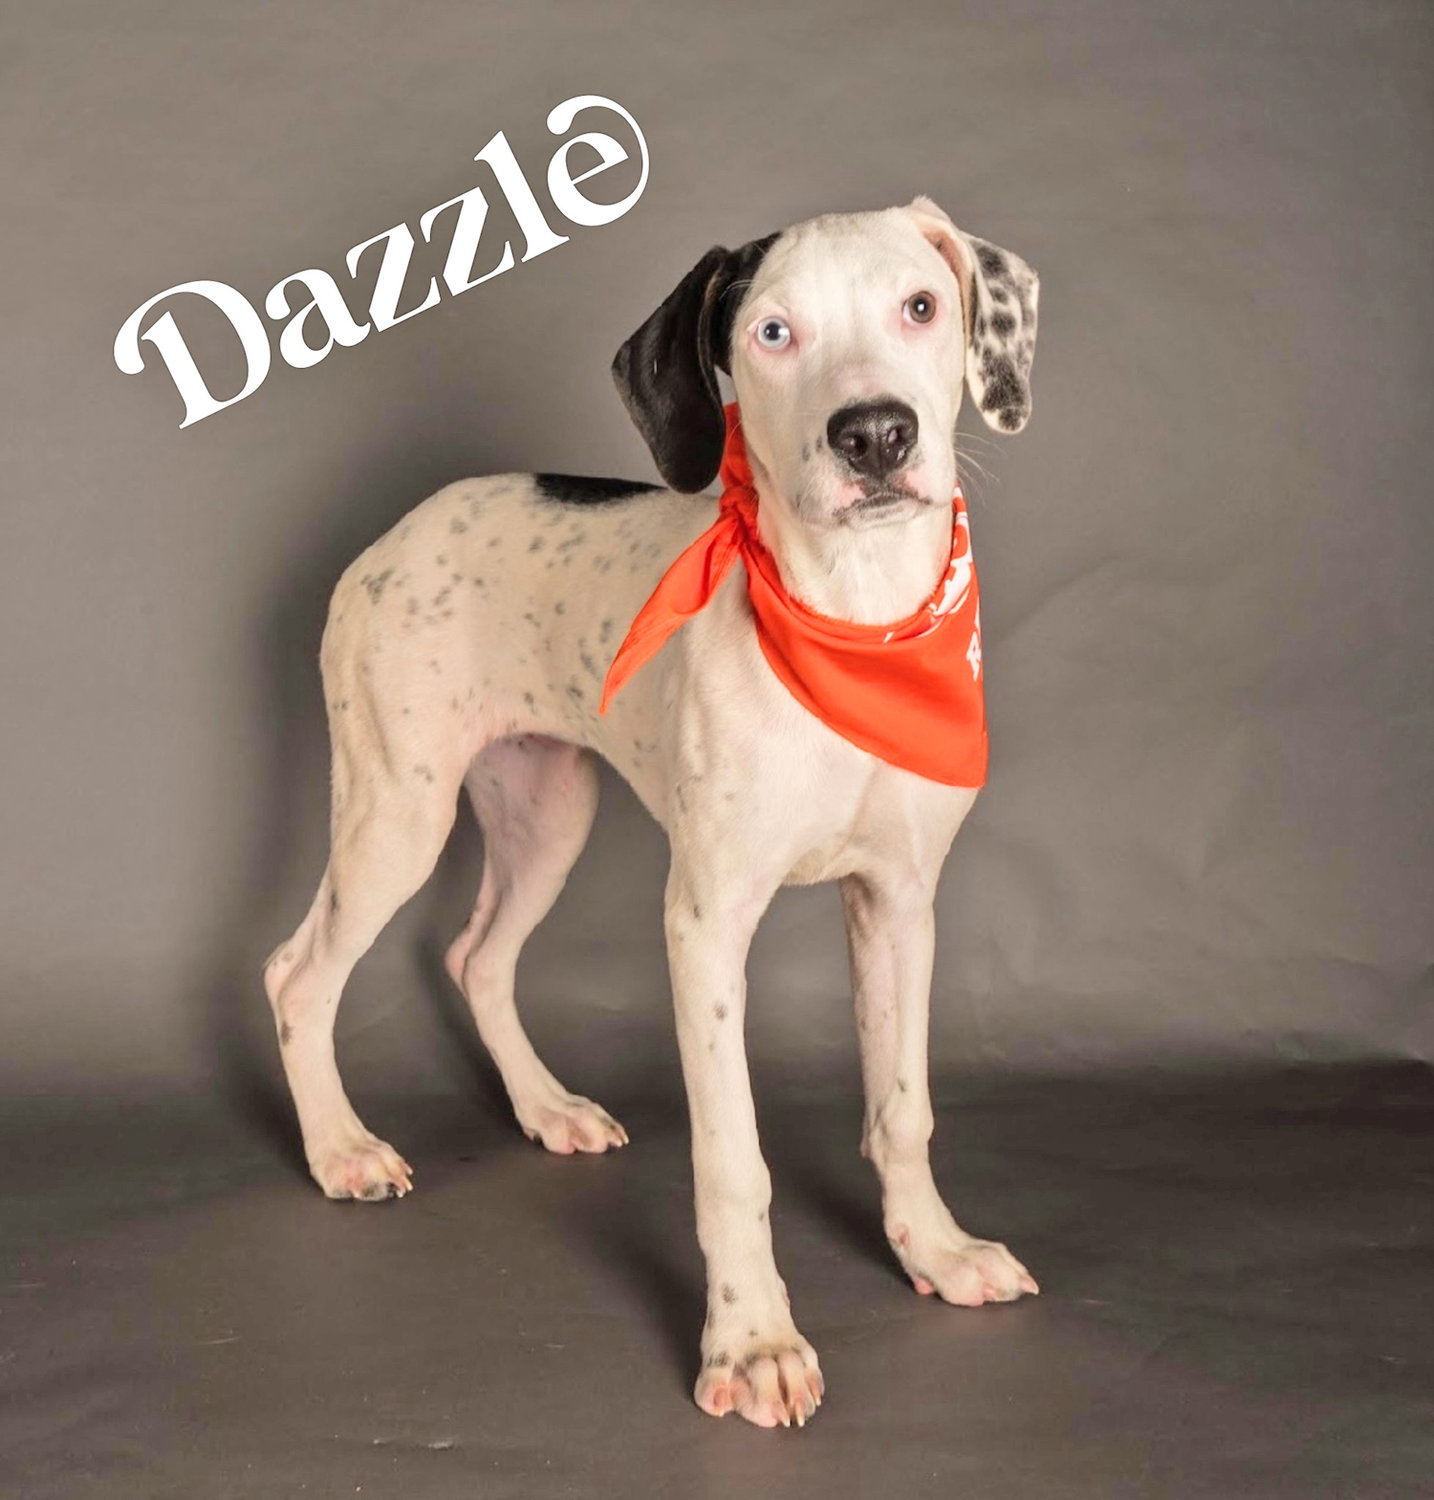 TEAM RUFF — A member of Team Ruff in the upcoming Puppy Bowl XVIII, Dazzle represents House of Paws Rescue in Utica.